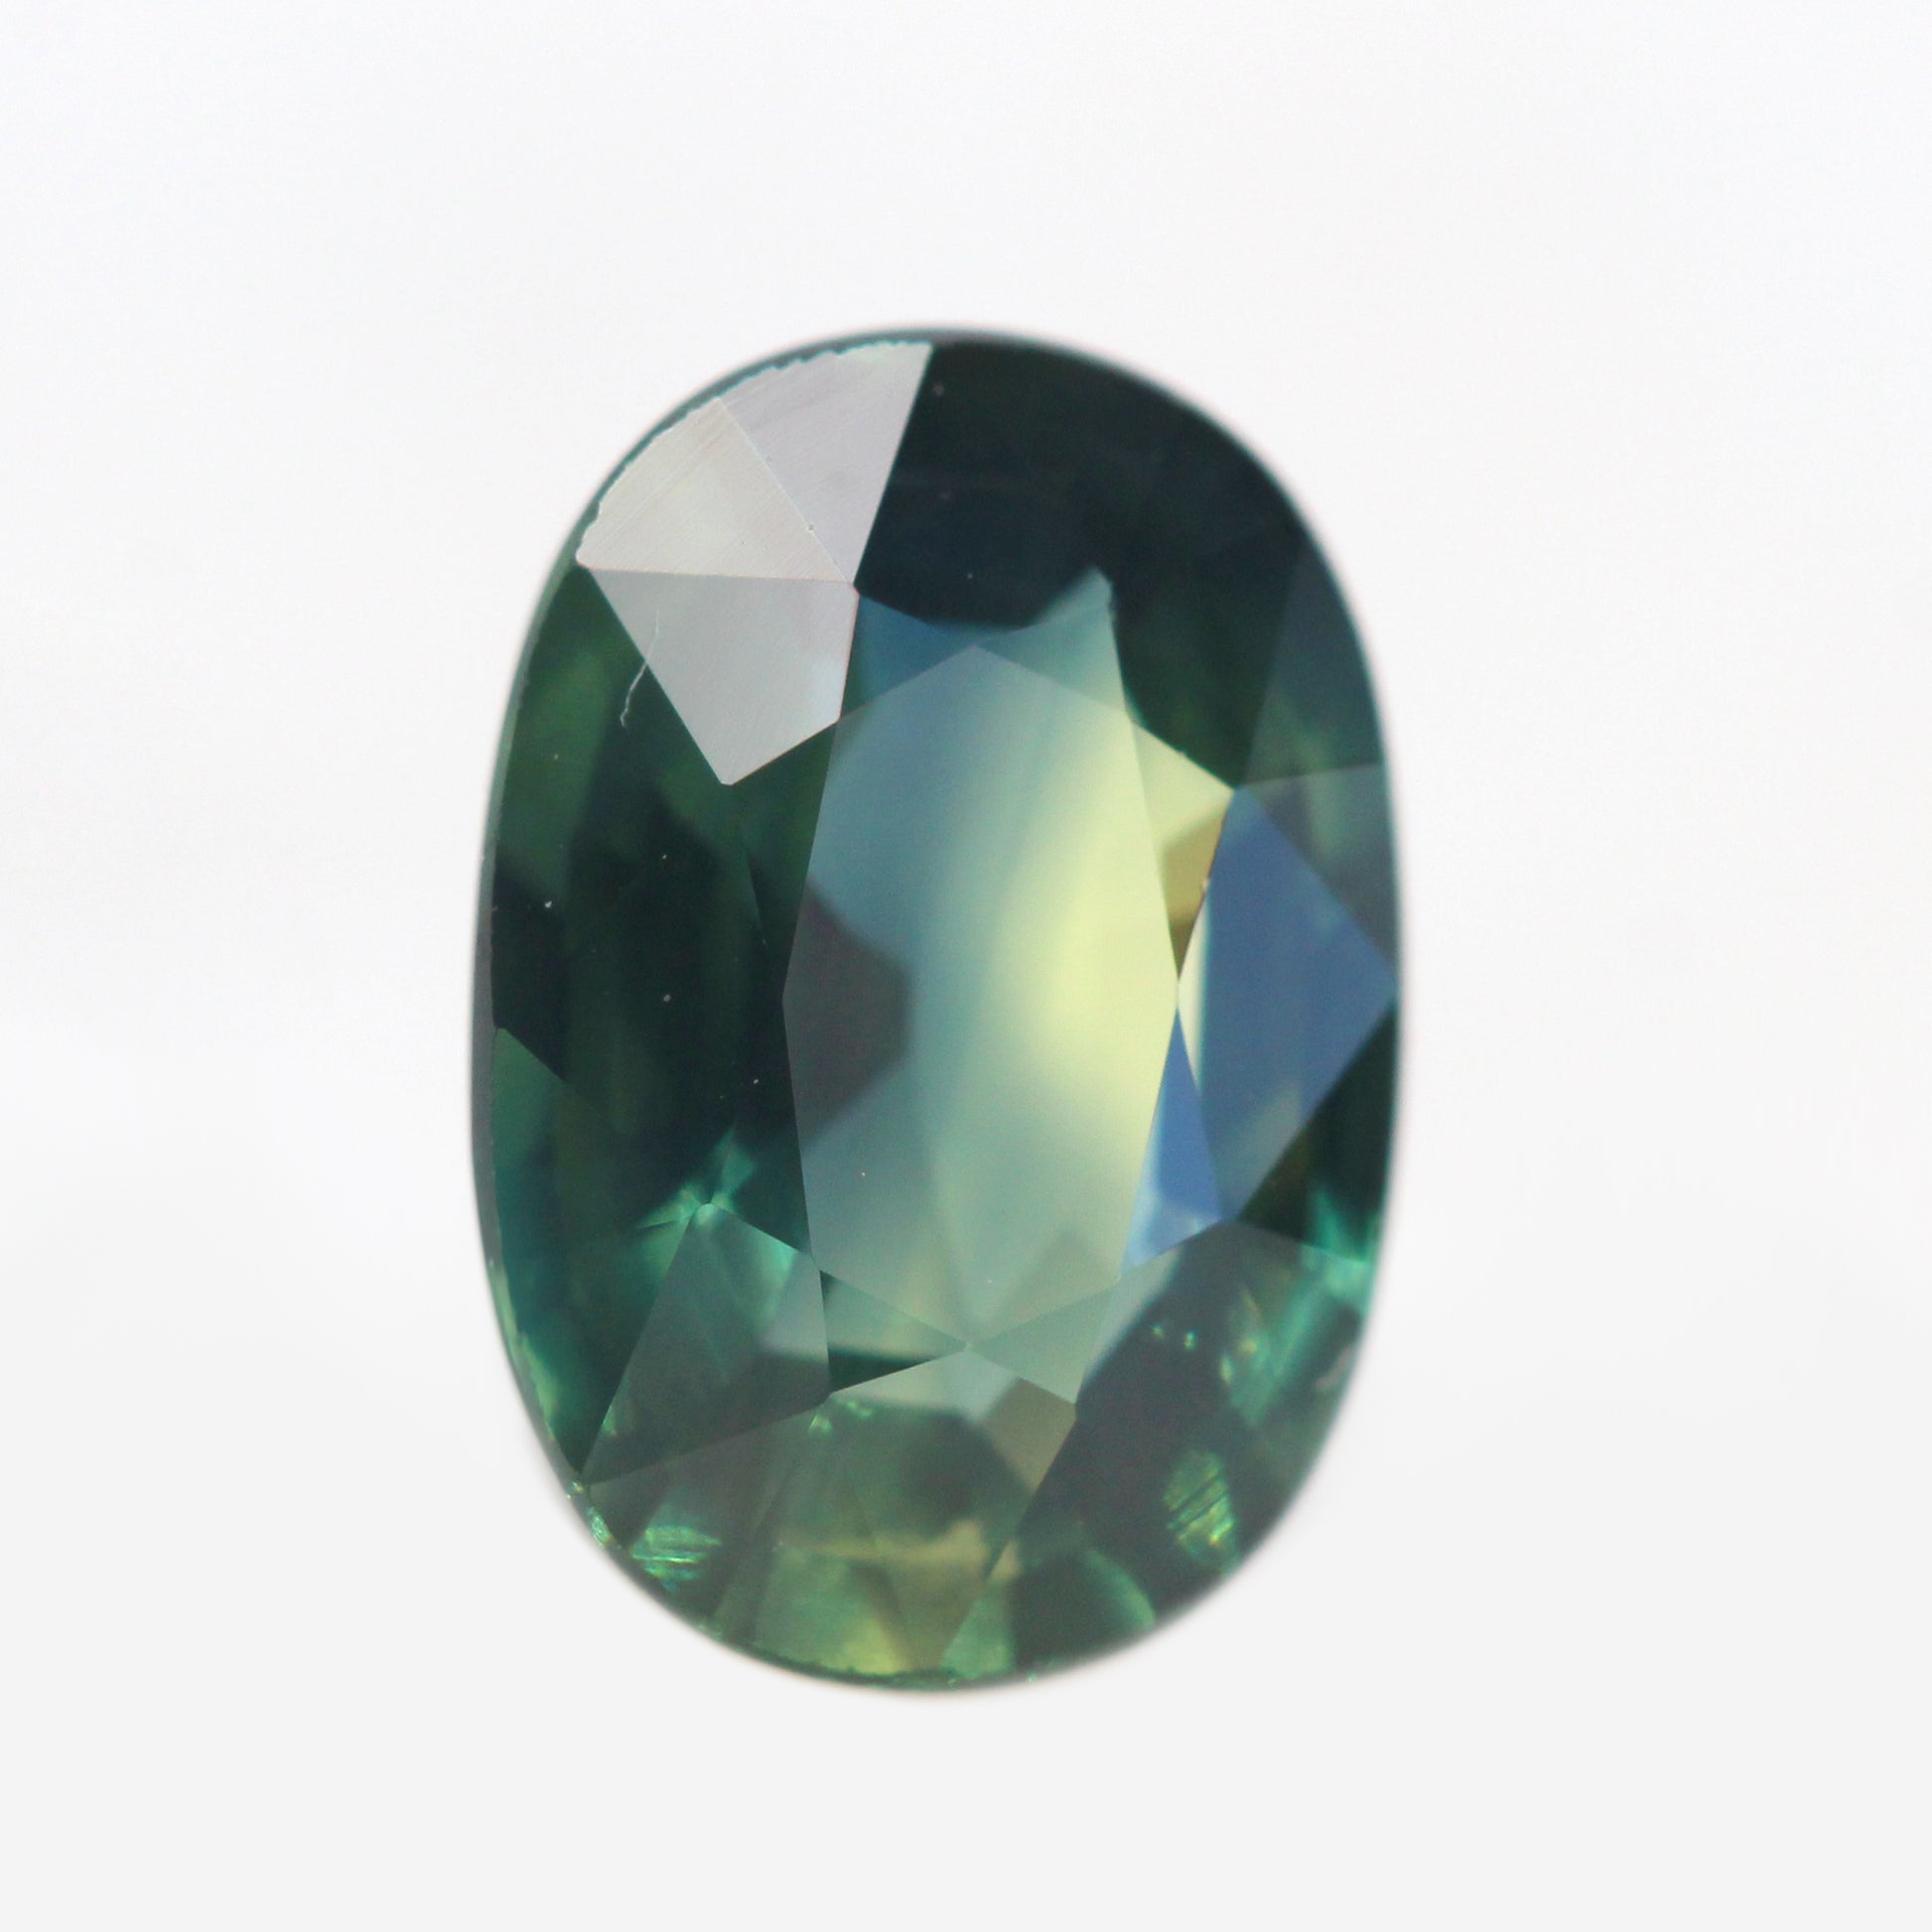 1.25 Carat Teal Green Oval Australian Sapphire for Custom Work - Inventory Code TOS125 - Midwinter Co. Alternative Bridal Rings and Modern Fine Jewelry